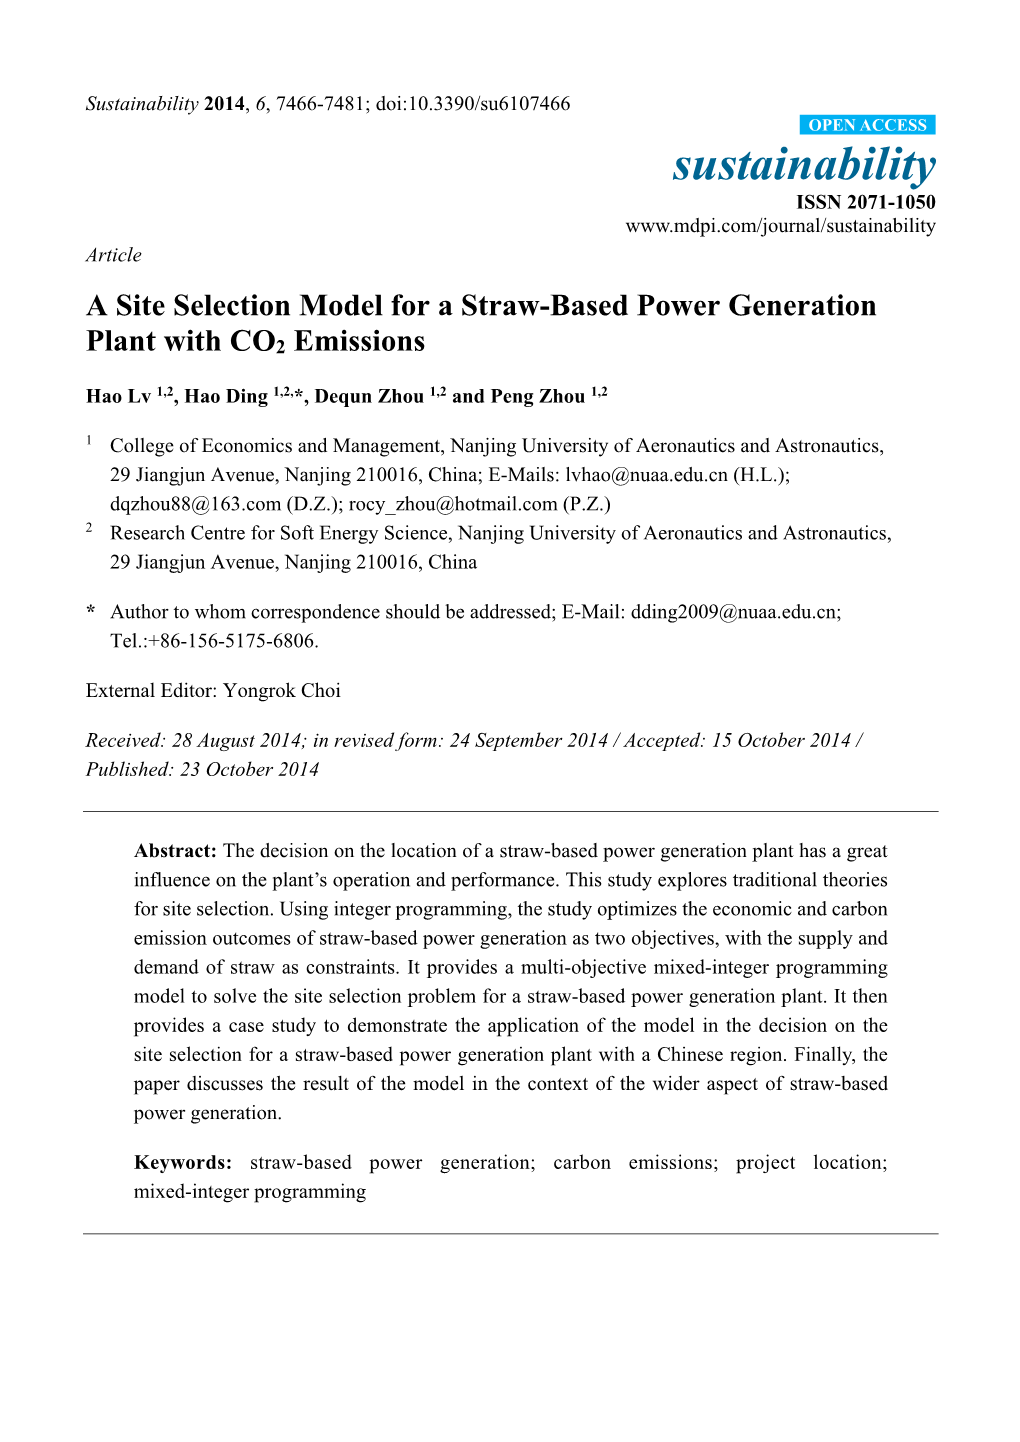 A Site Selection Model for a Straw-Based Power Generation Plant with CO2 Emissions